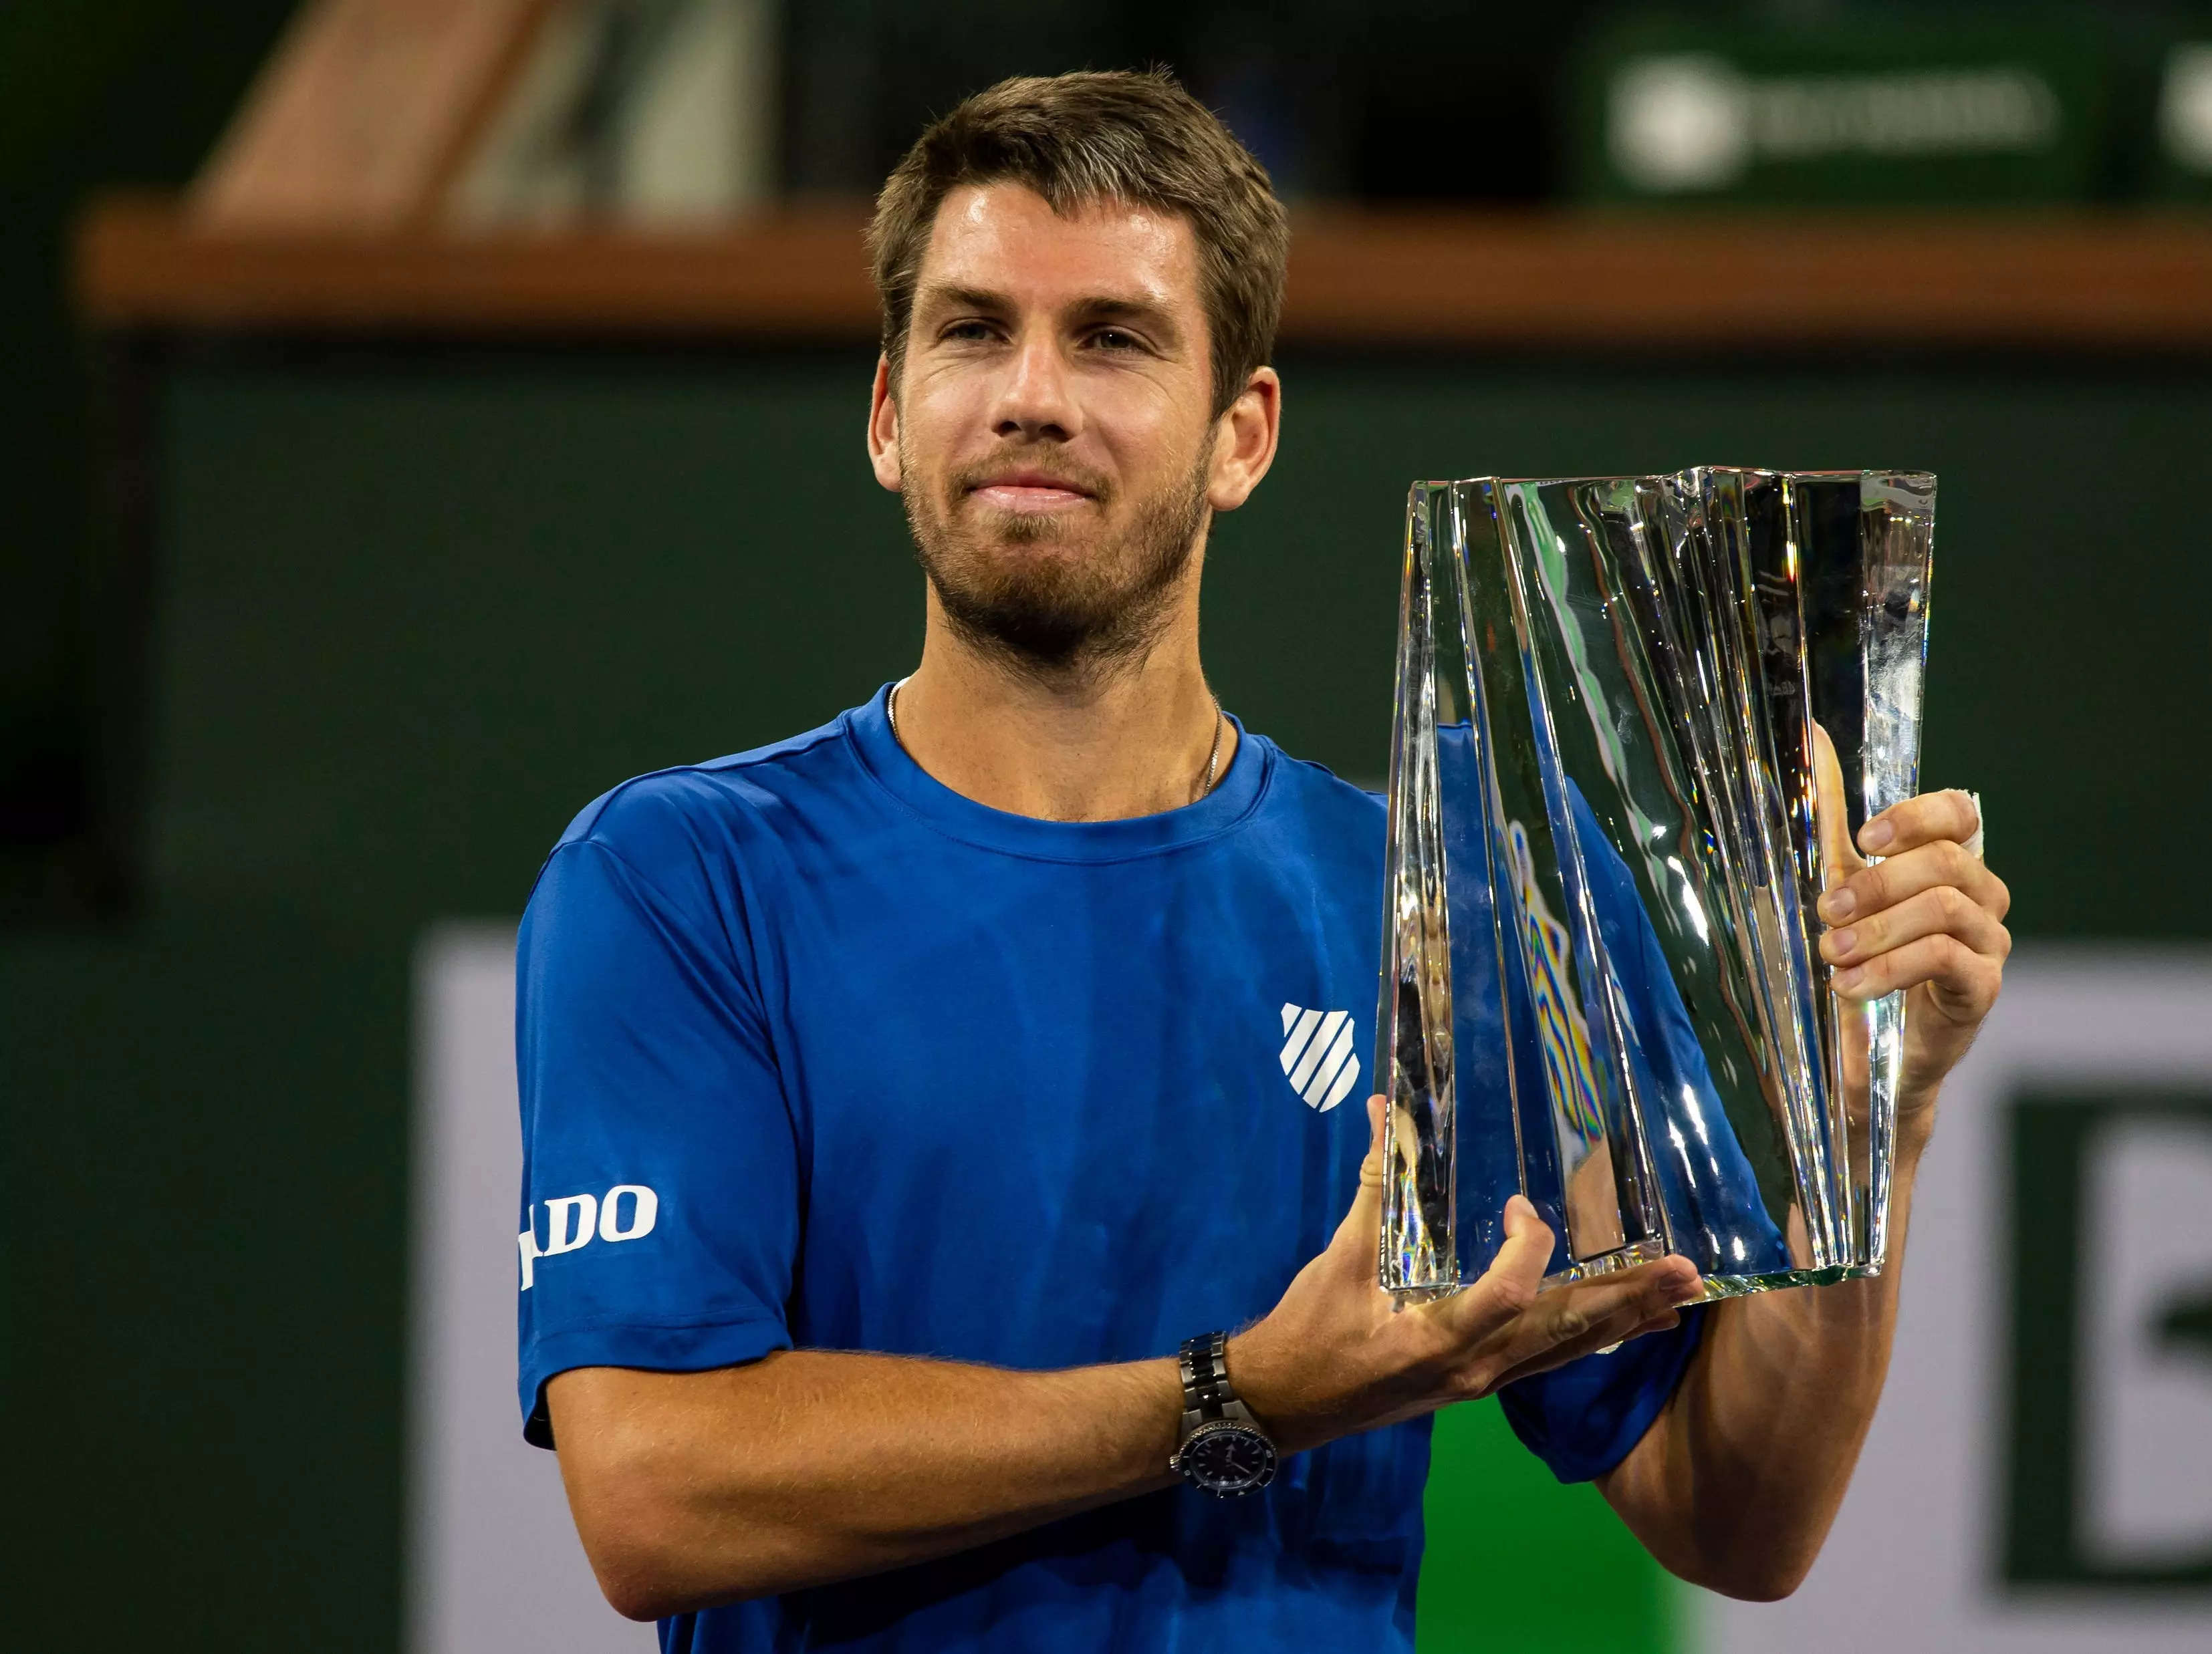 The surprise victor of the $1.2 million Indian Wells tennis tournament had his sneakers stolen just hours before the final Business Insider India